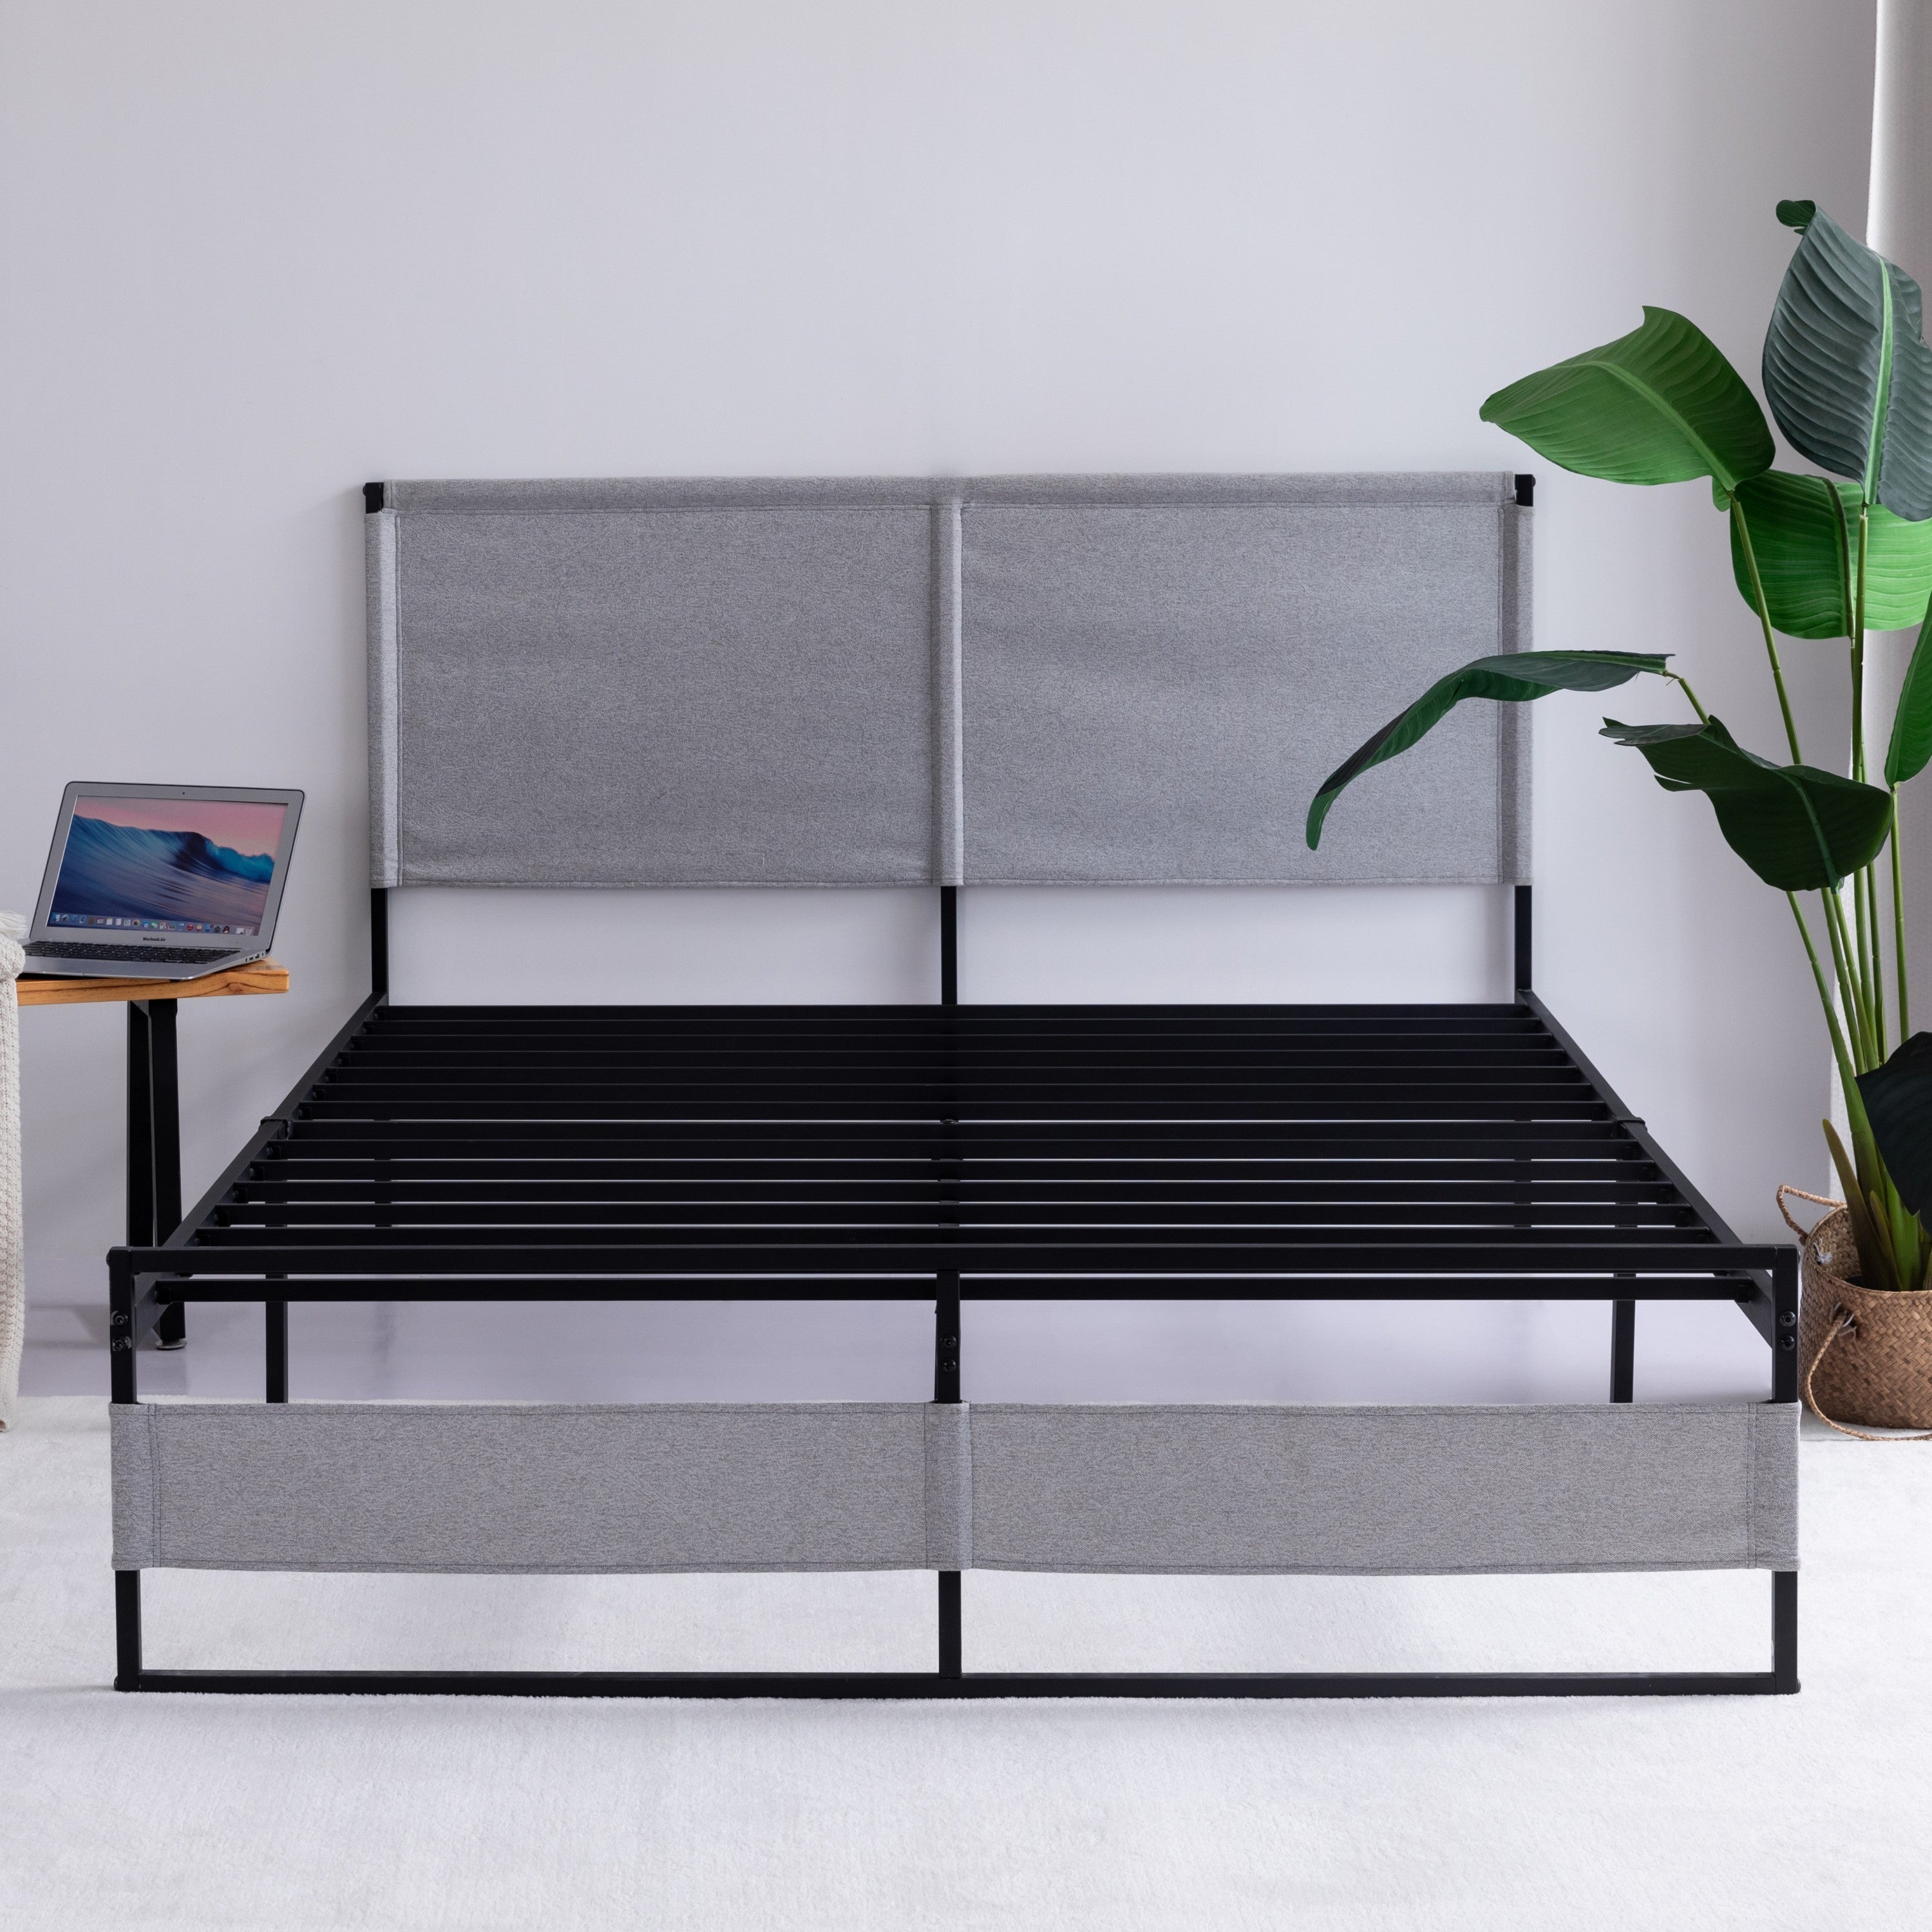 V4 Metal Bed Frame 14 Inch Queen Size with Headboard and Footboard, Mattress Platform with 12 Inch Storage Space